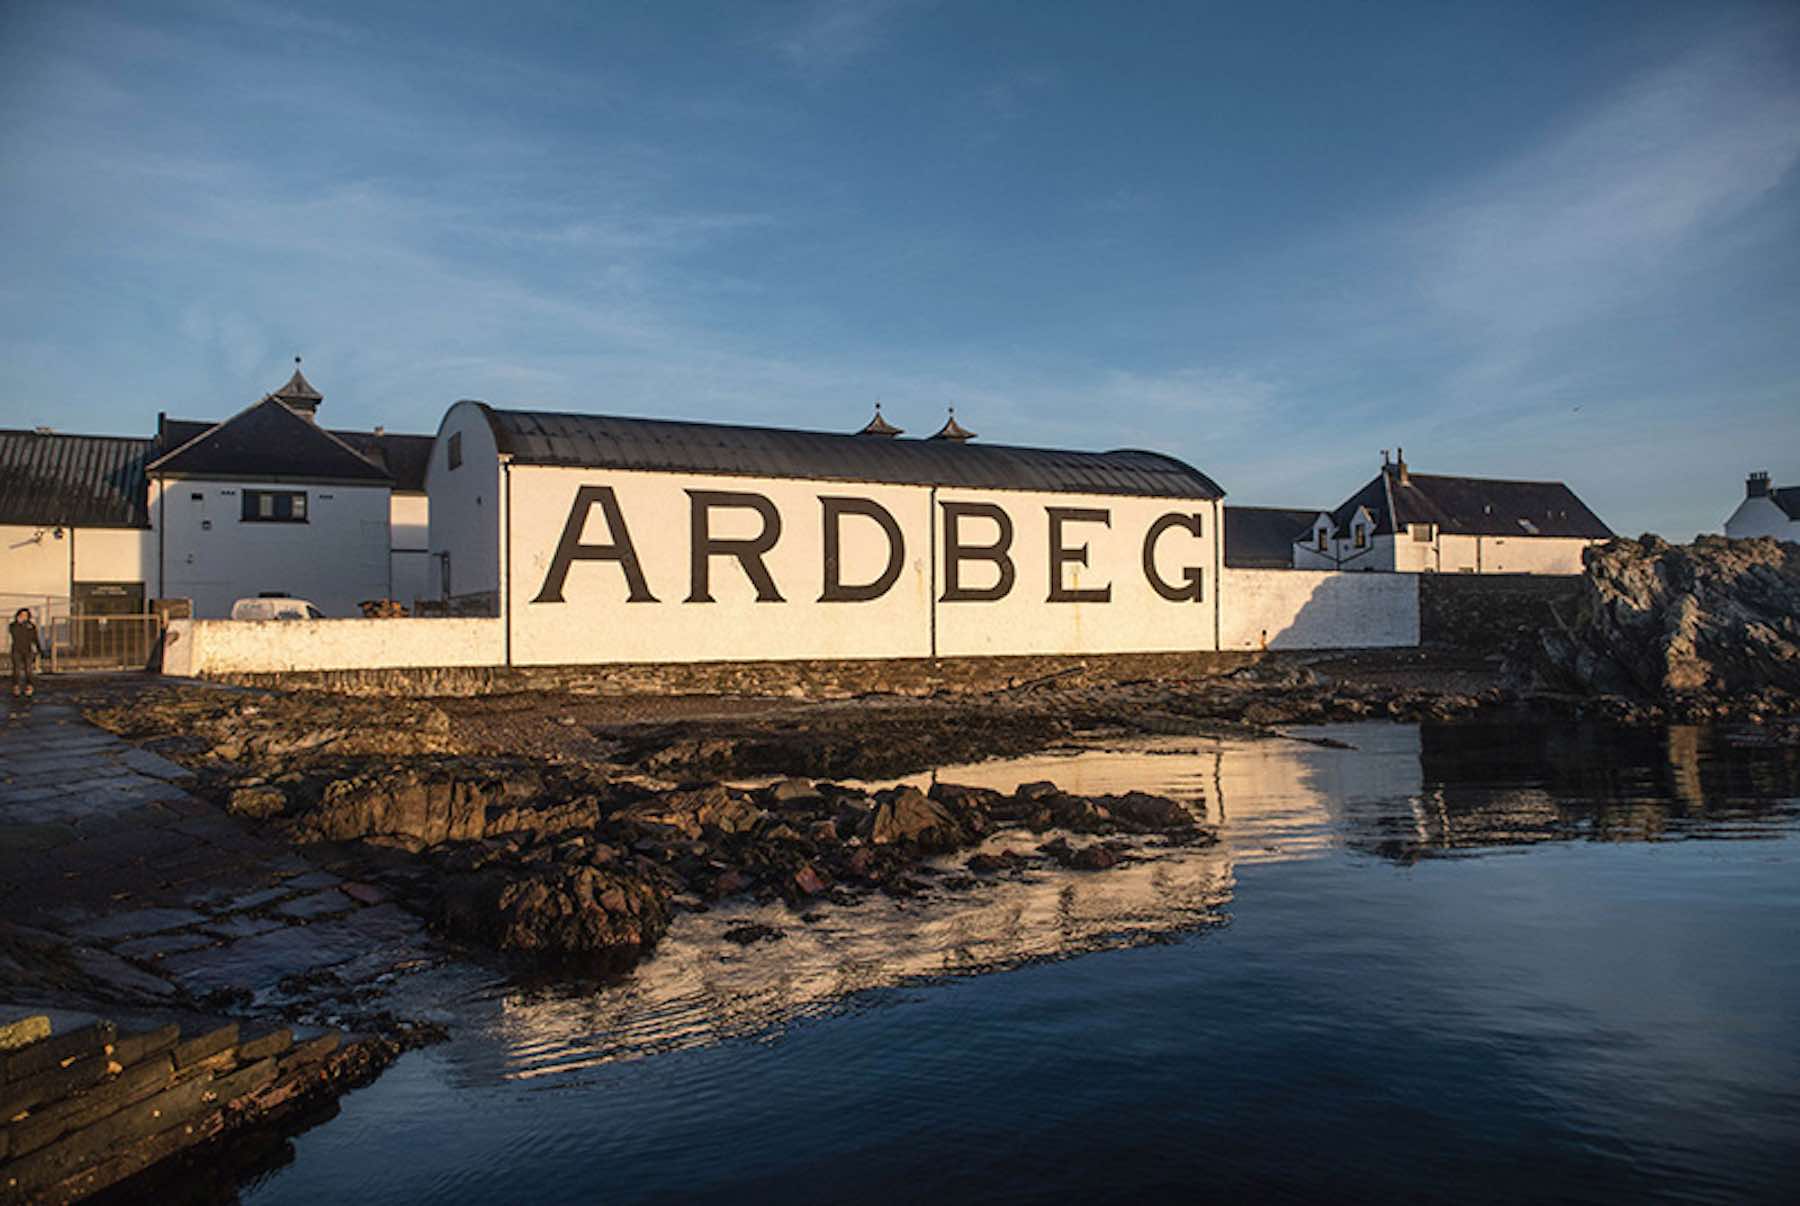 Ardbeg Distillery: A Journey into the Heart of Islay's Peated Whisky Heritage